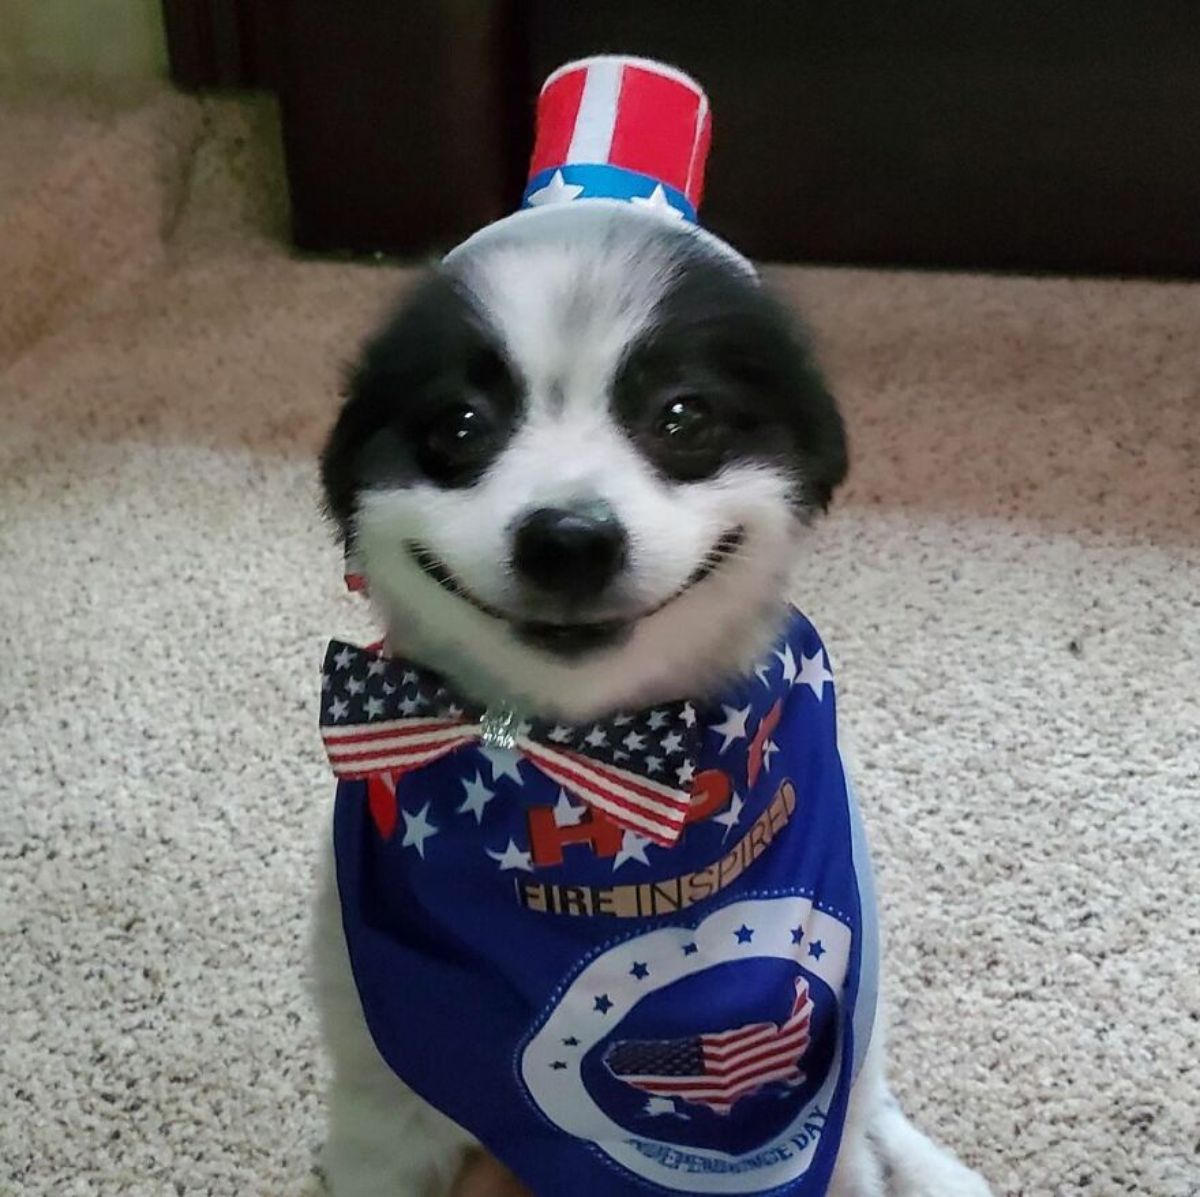 black and white dog who looks like he's smiling sitting on beige carpet and wearing america-themed hat and clothes